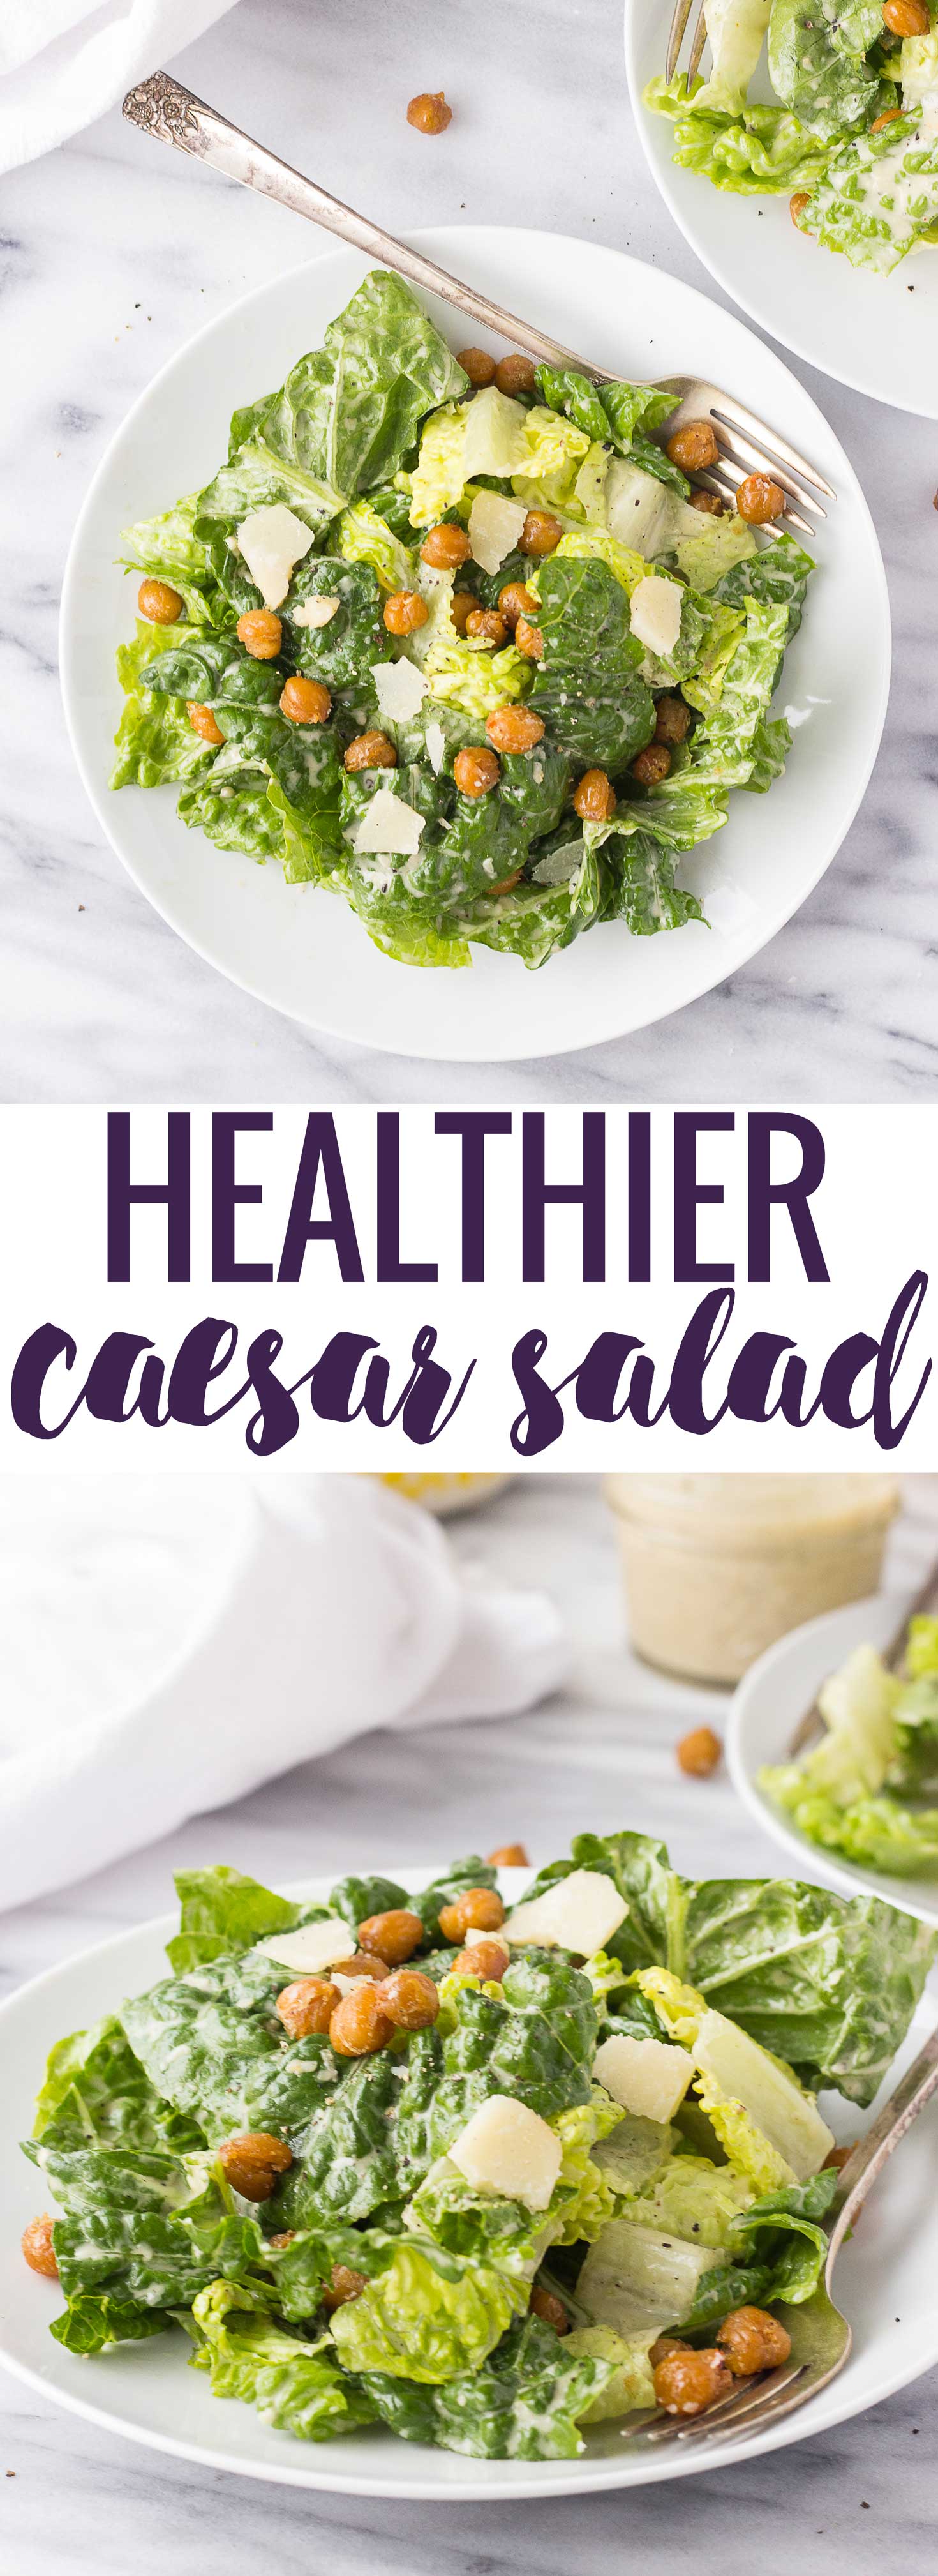 Healthier Caesar Salad - use roasted chick peas for an added flavor and crunch instead of croutons; the homemade dressing is out of this world, too!